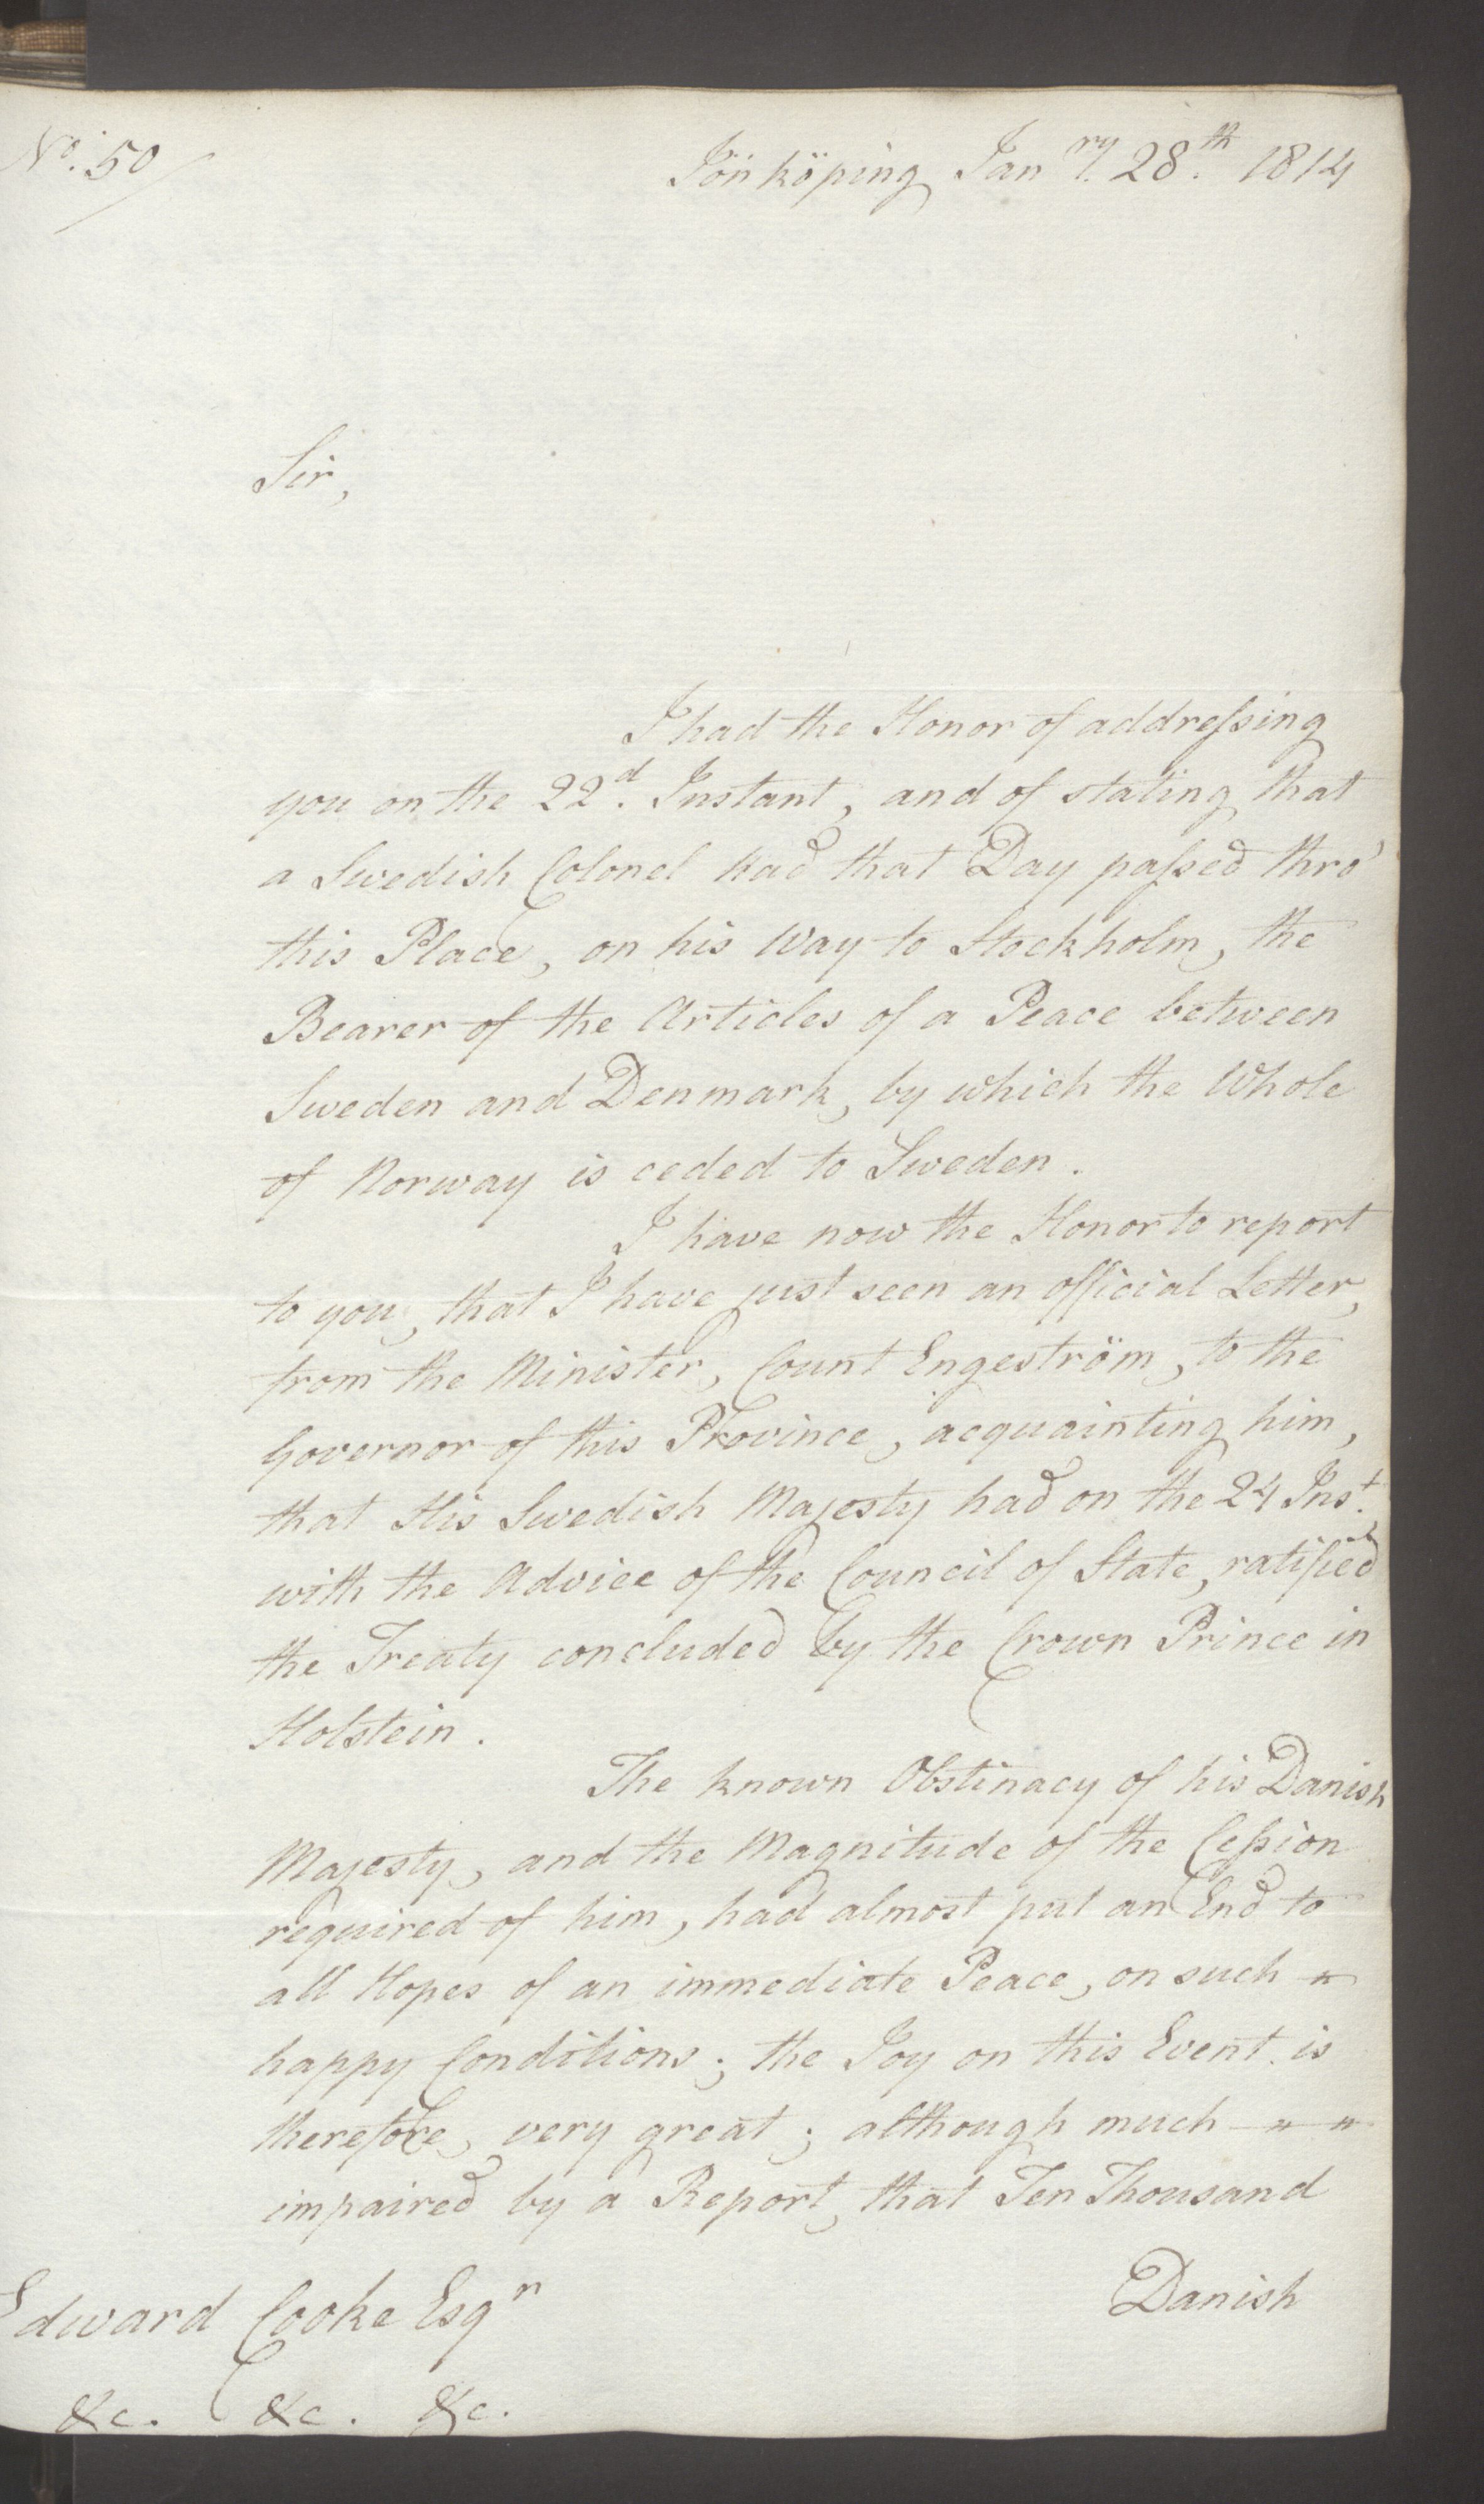 Foreign Office*, UKA/-/FO 38/16: Sir C. Gordon. Reports from Malmö, Jonkoping, and Helsingborg, 1814, p. 14